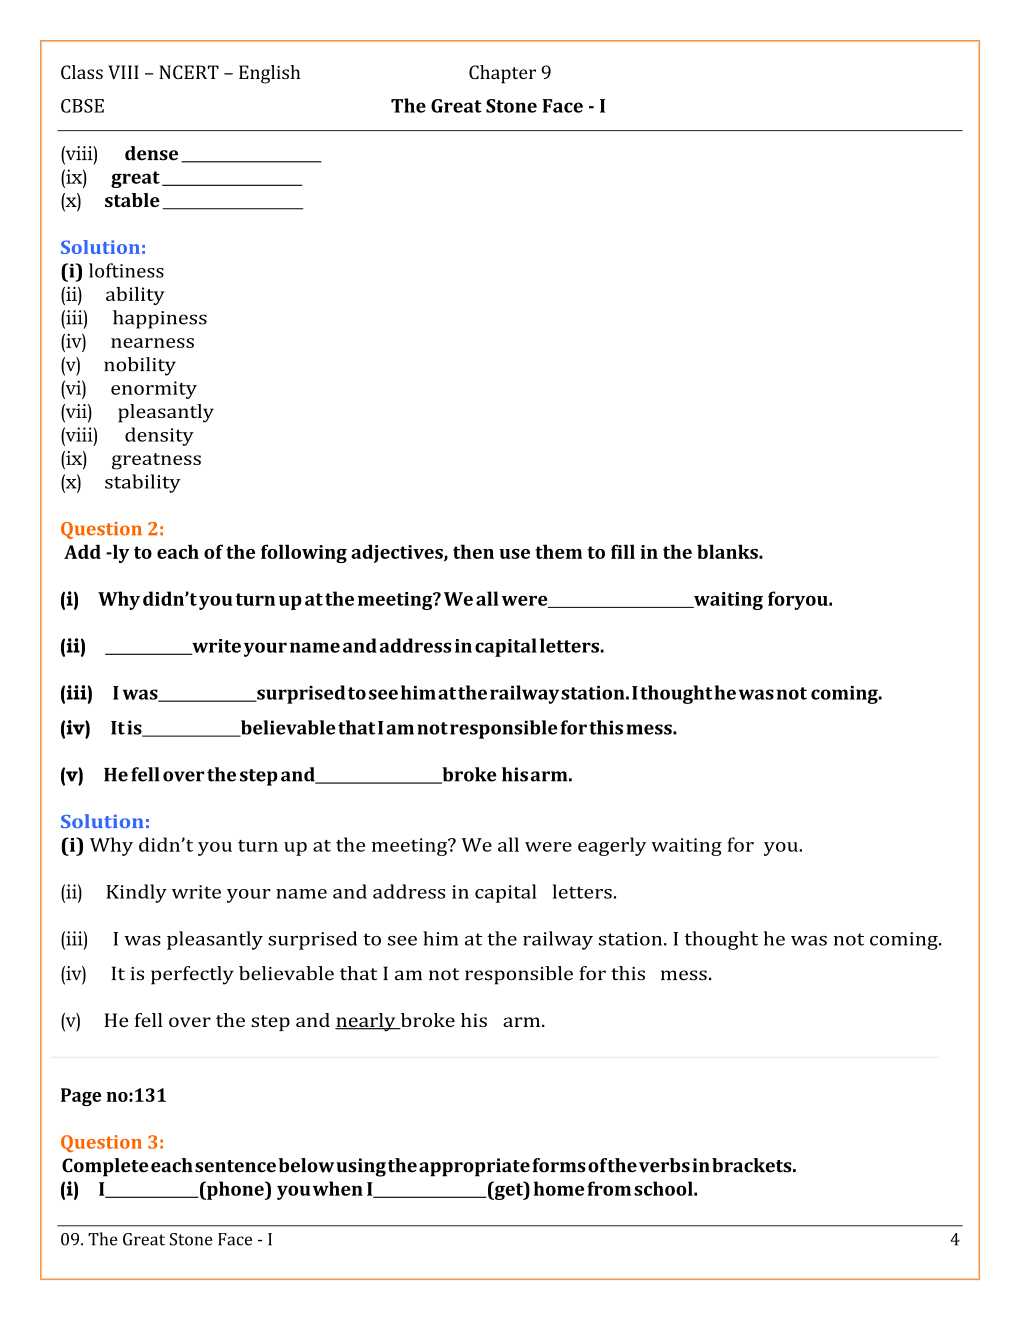 NCERT Solutions For Class 8 English Honey Dew Chapter 9 